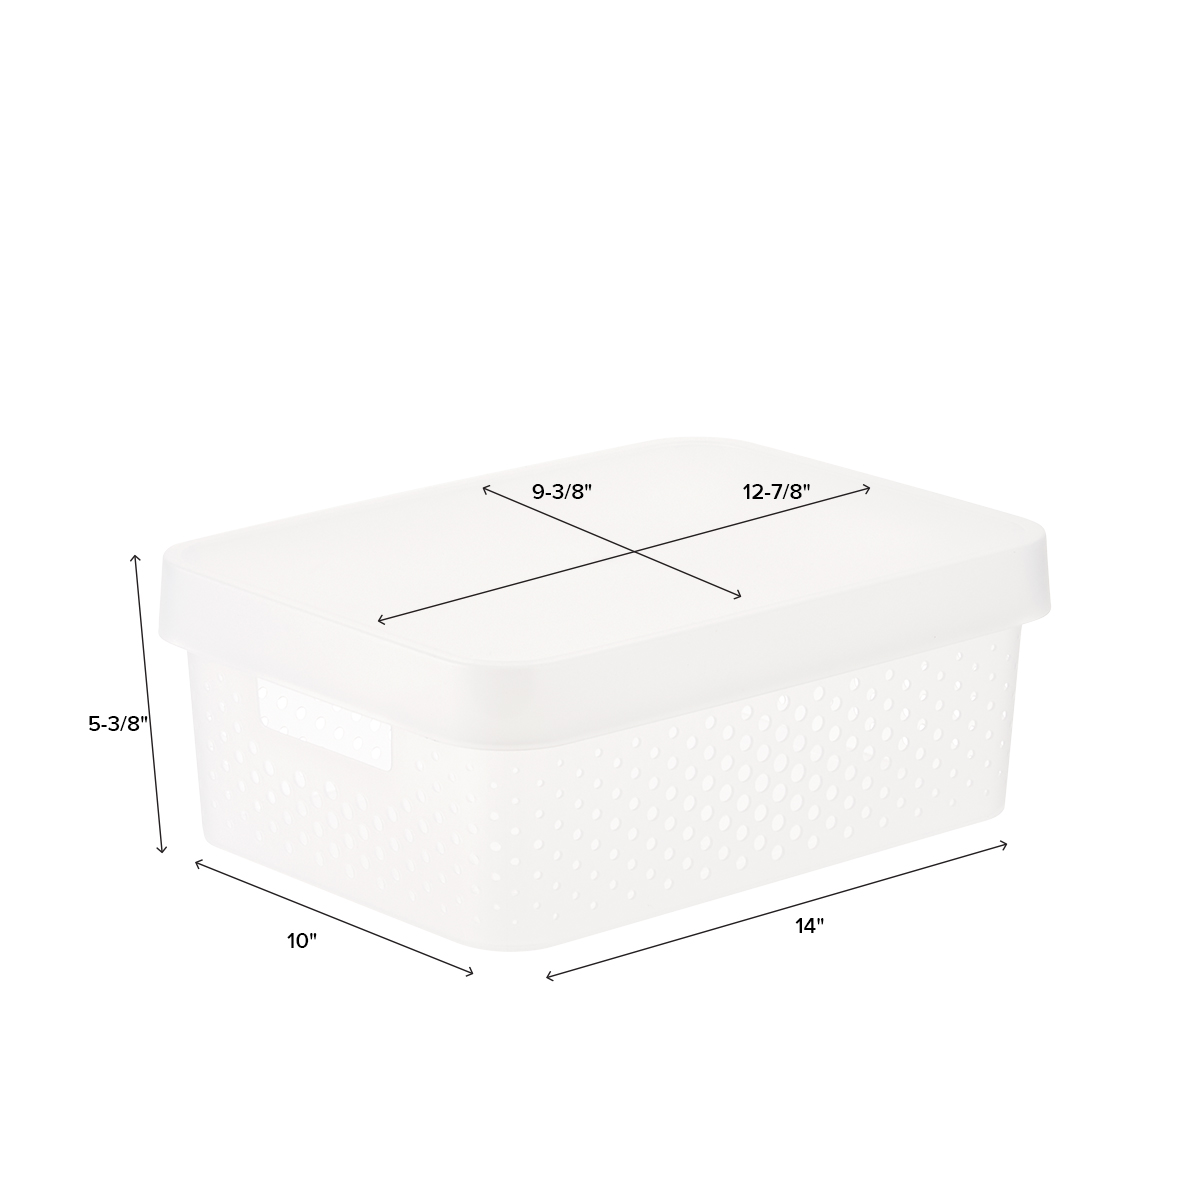 https://www.containerstore.com/catalogimages/475670/10076449-infinity-dot-box-translucen.jpg